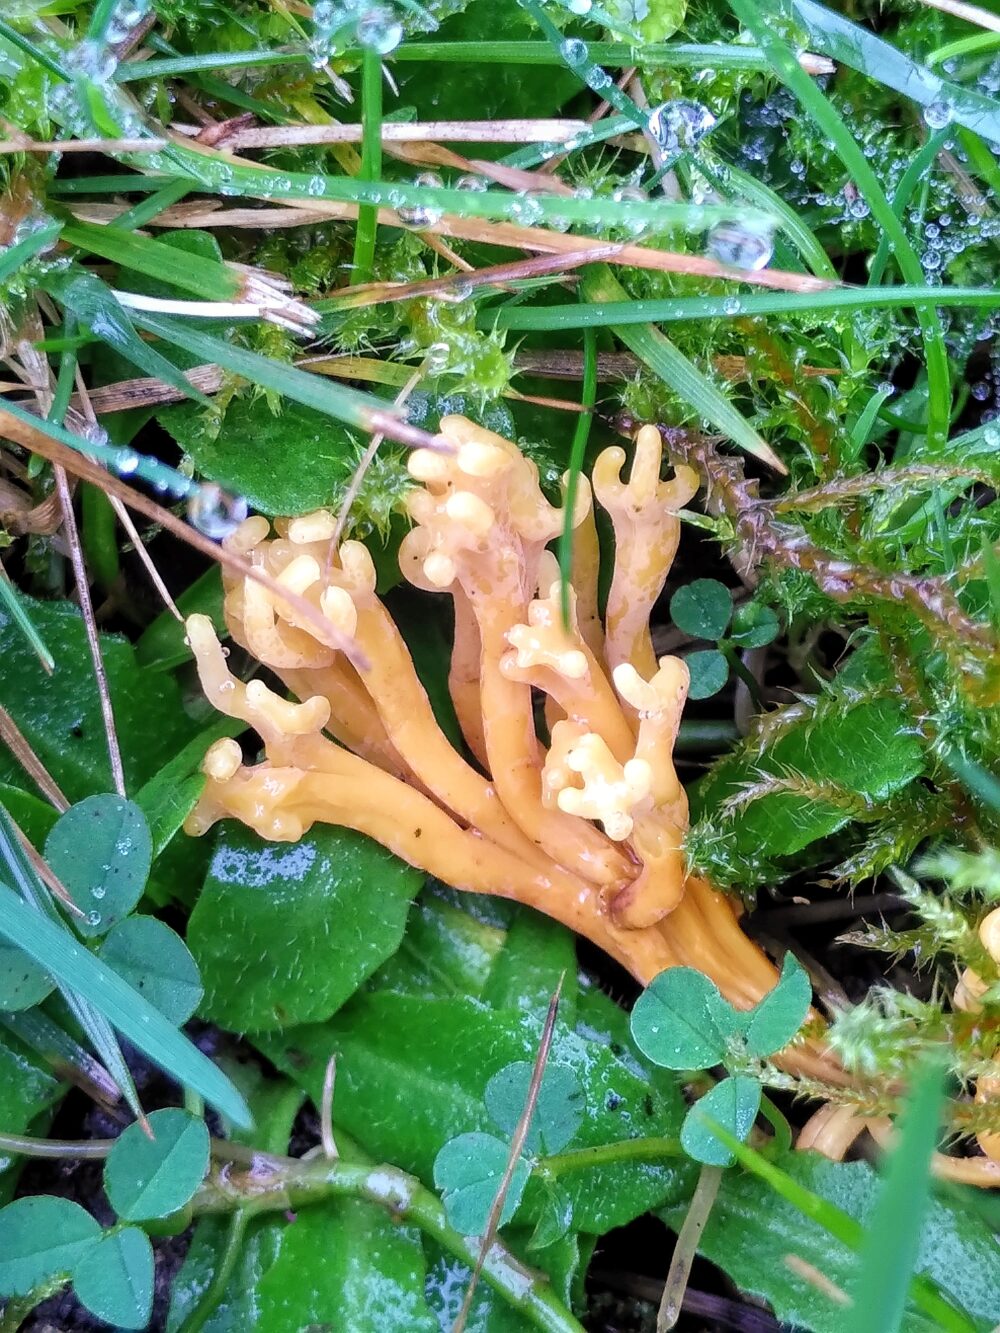 Meadow Coral fungus, St Chad's, 2021